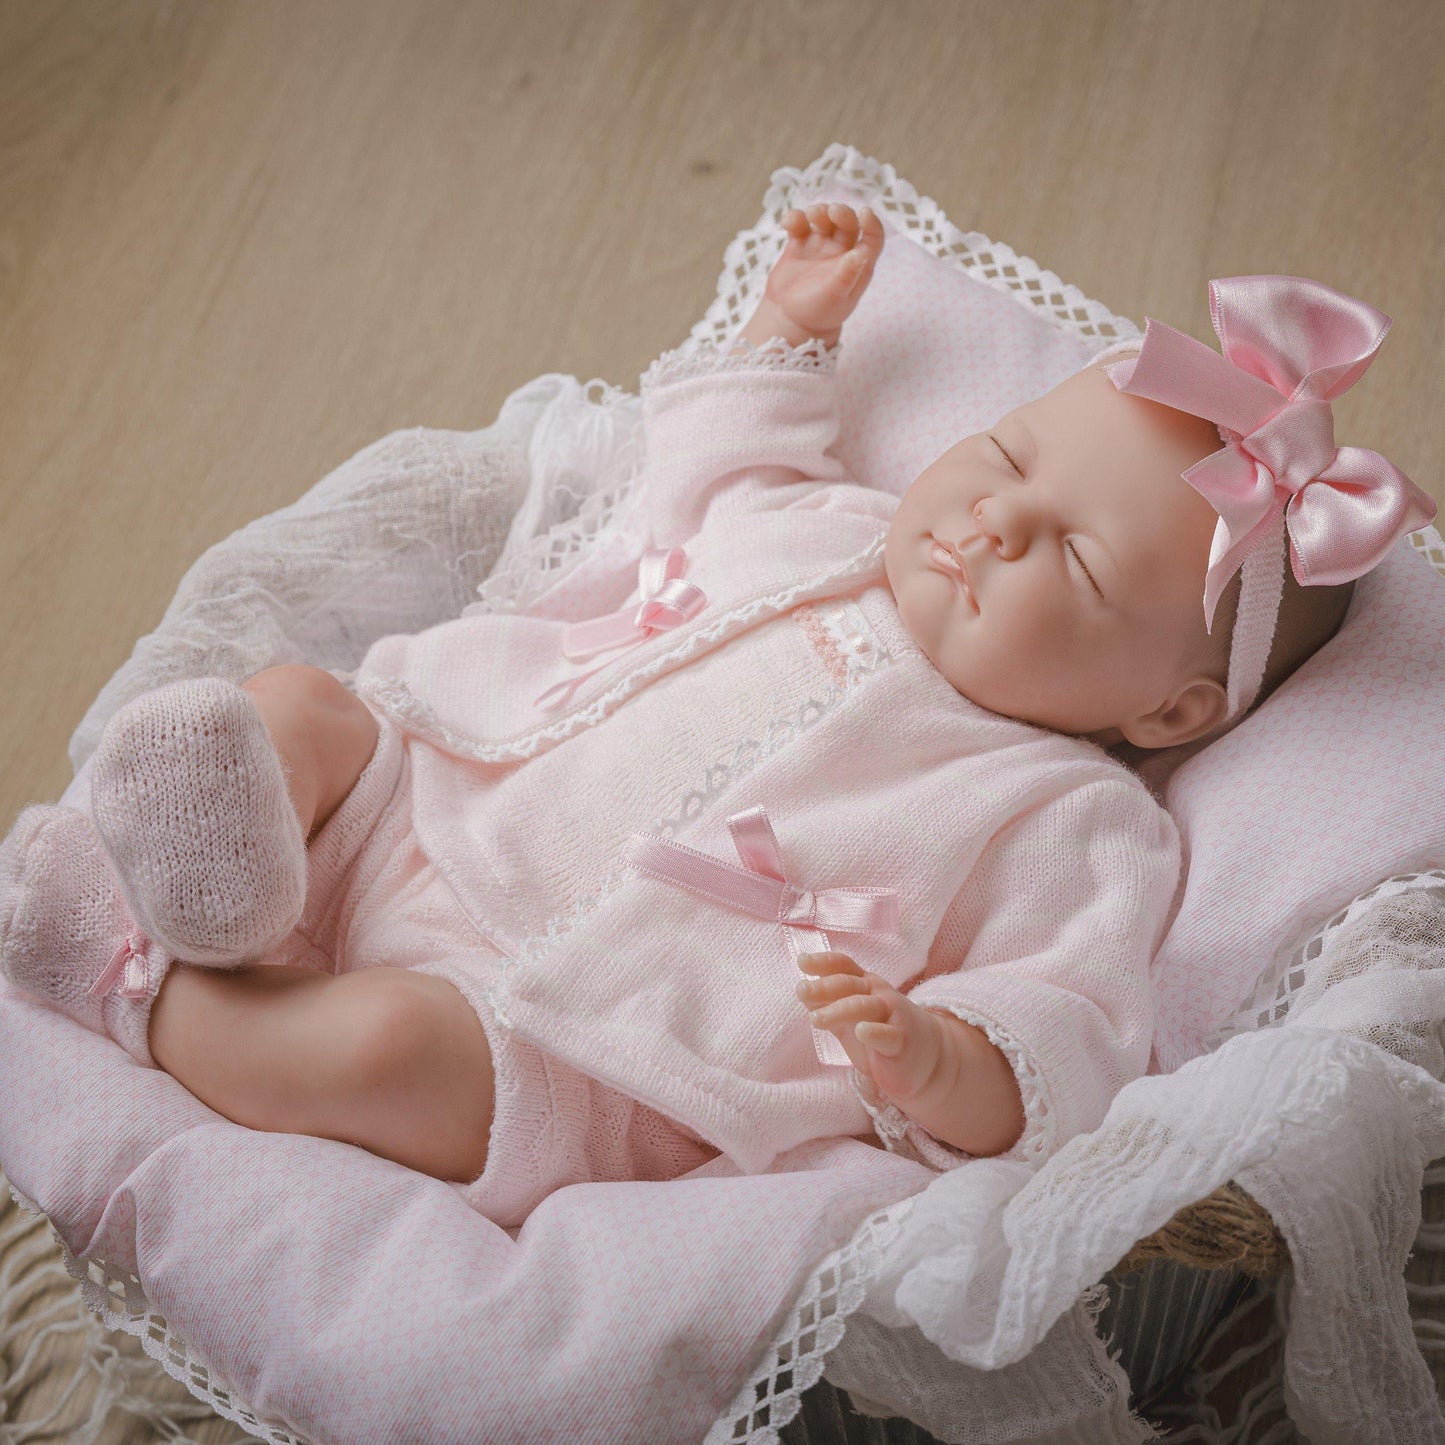 Berenguer Classics 17" Limited Edition "Babylin" - Reborn Baby Doll by JC Toys - JC Toys Group Inc.